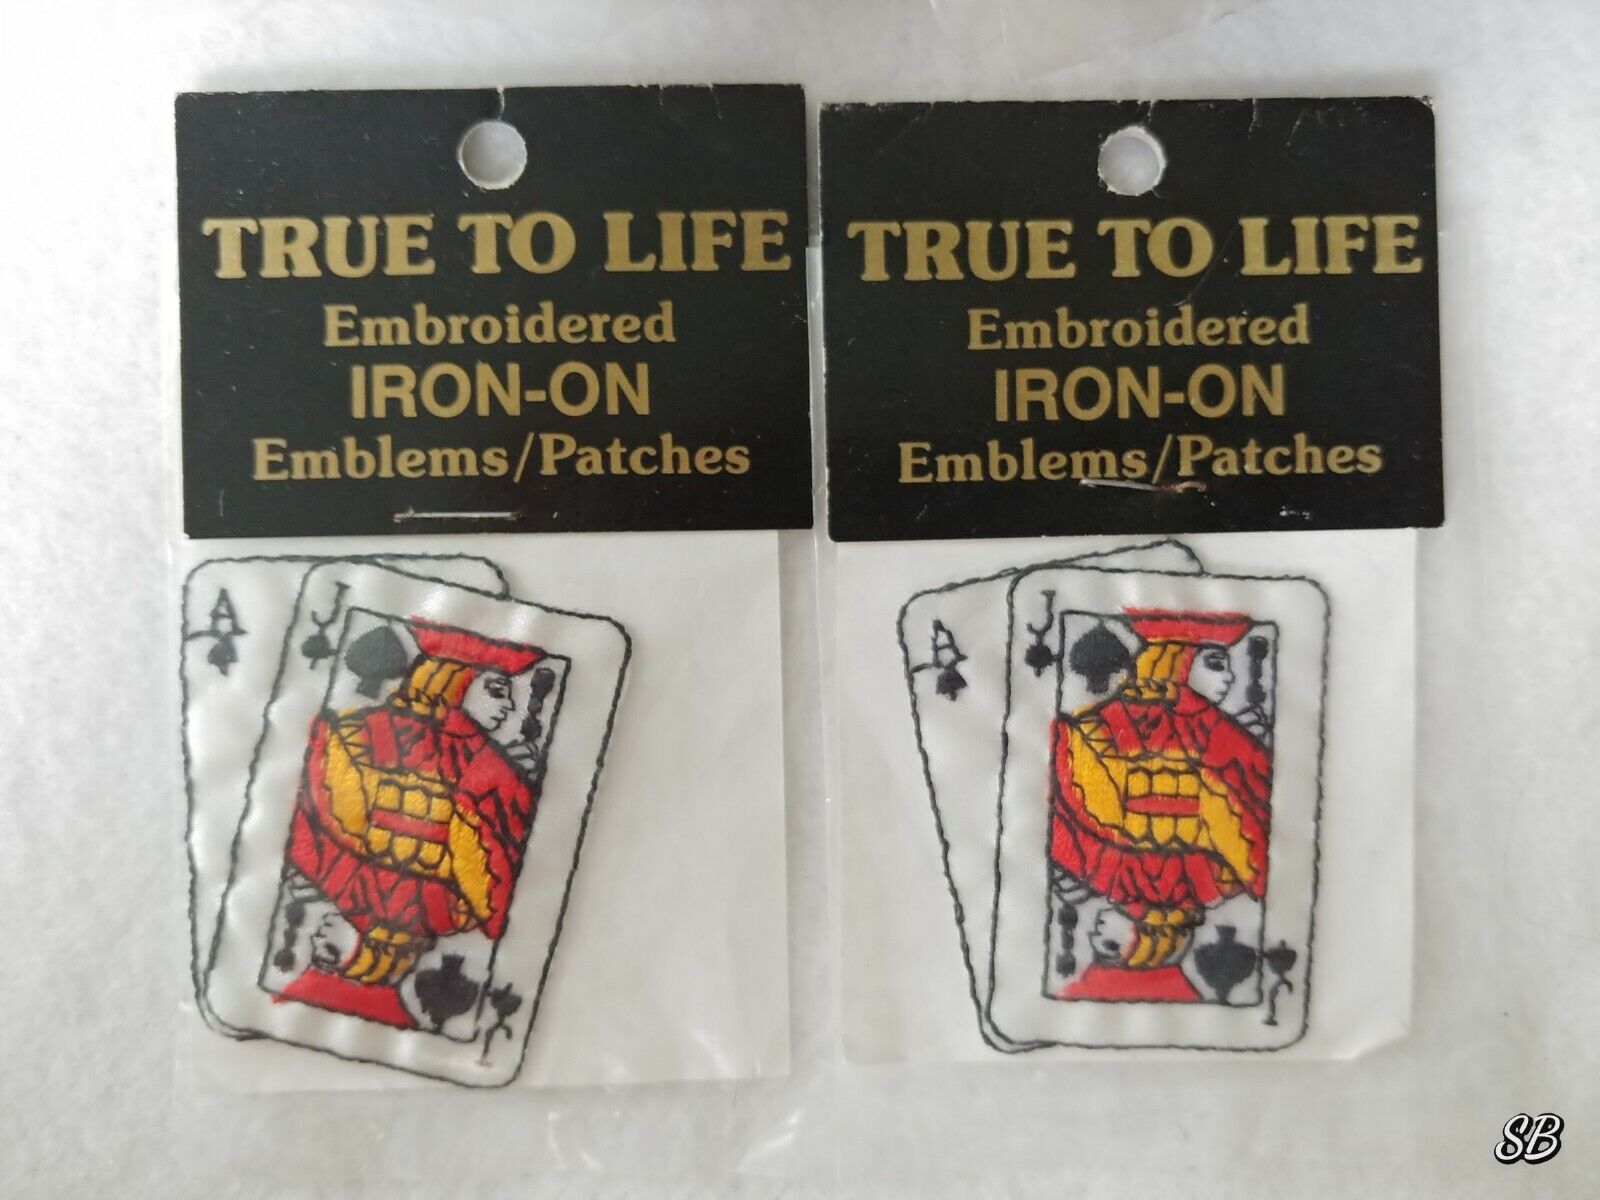 2 Vintage BLACKJACK Poker PATCHES Iron-on True To Life Embroidery MAFCO Emblem